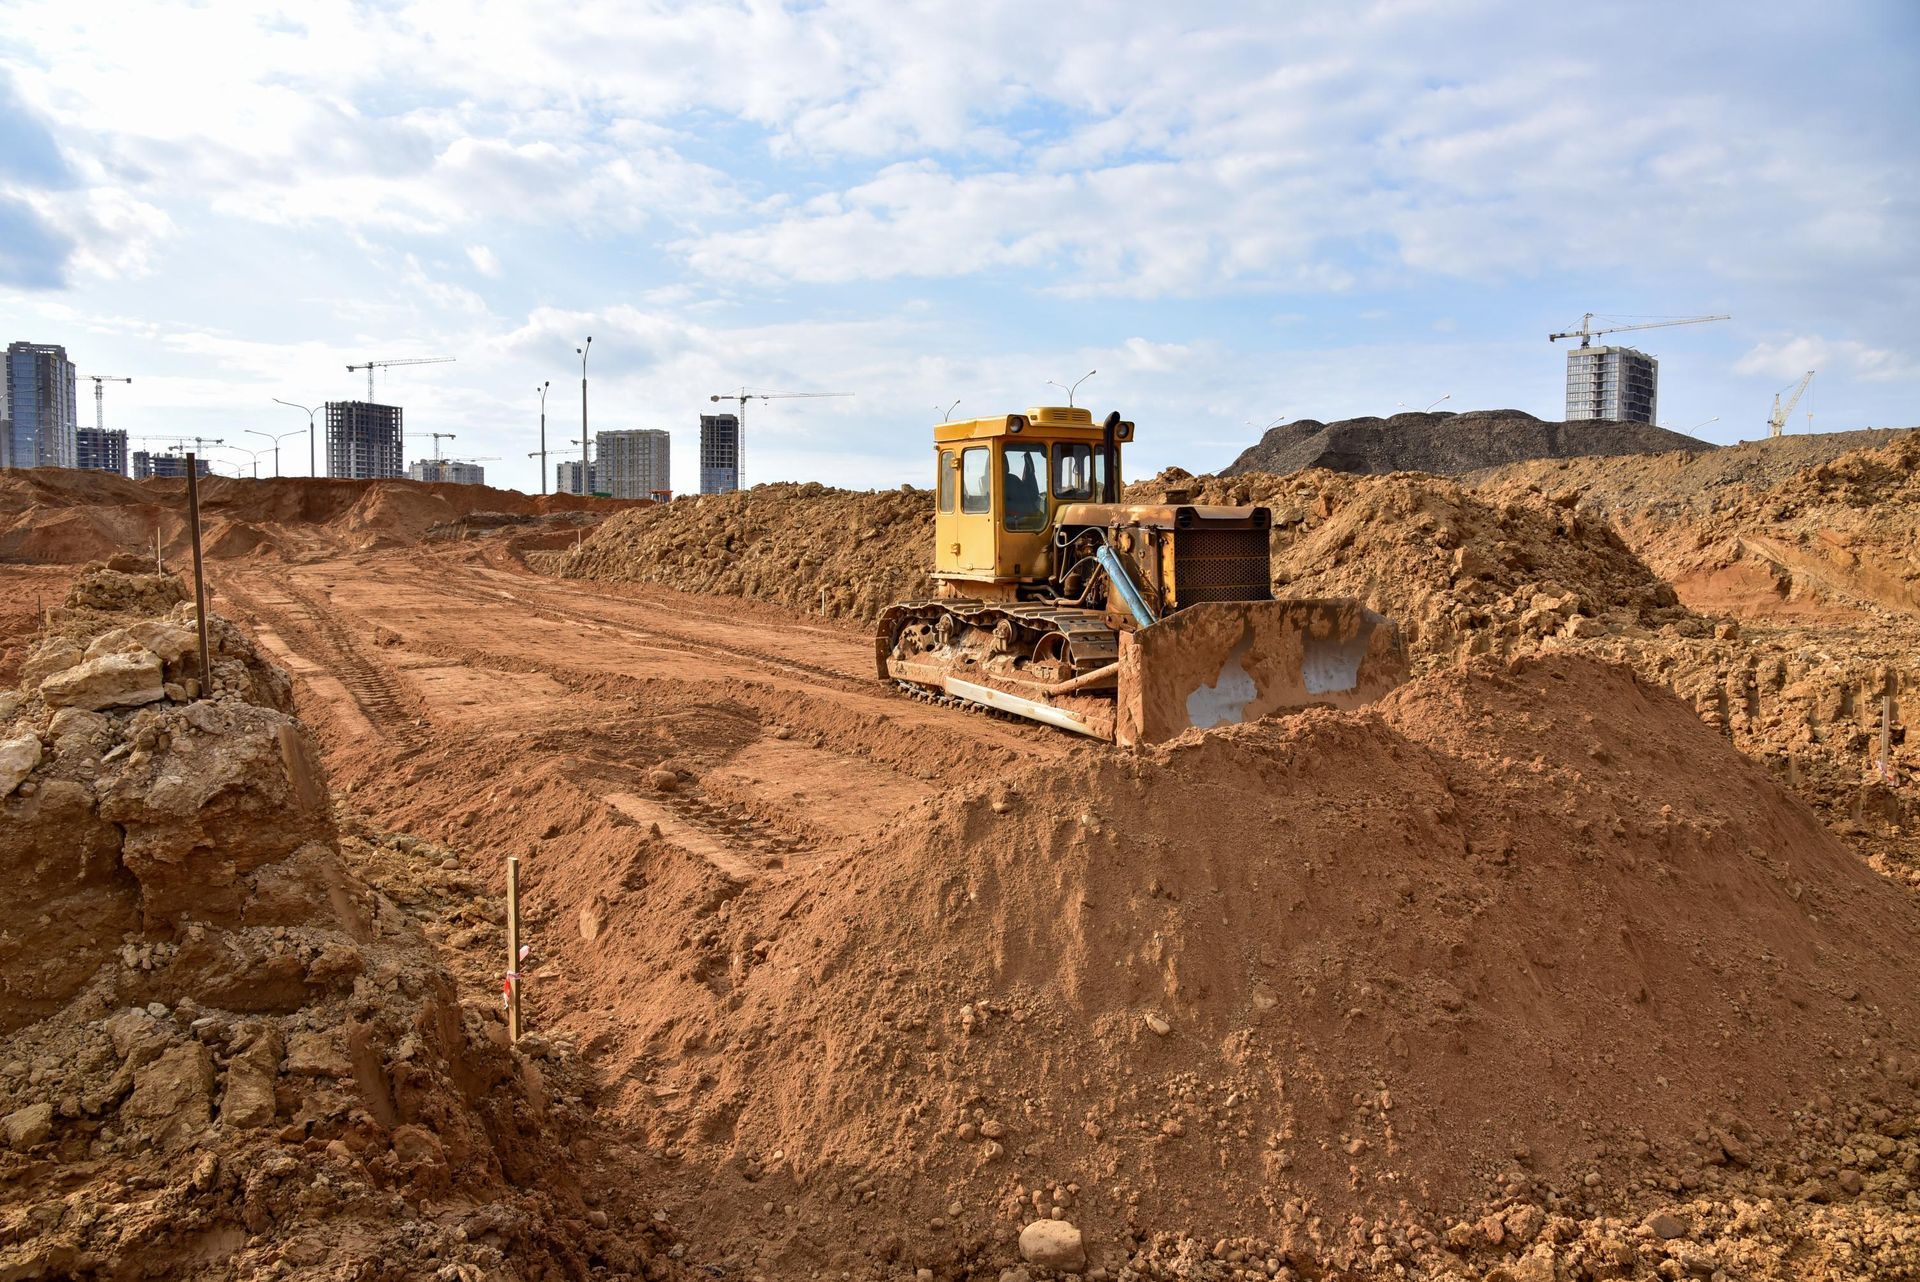 A bulldozer is moving dirt on a construction site.